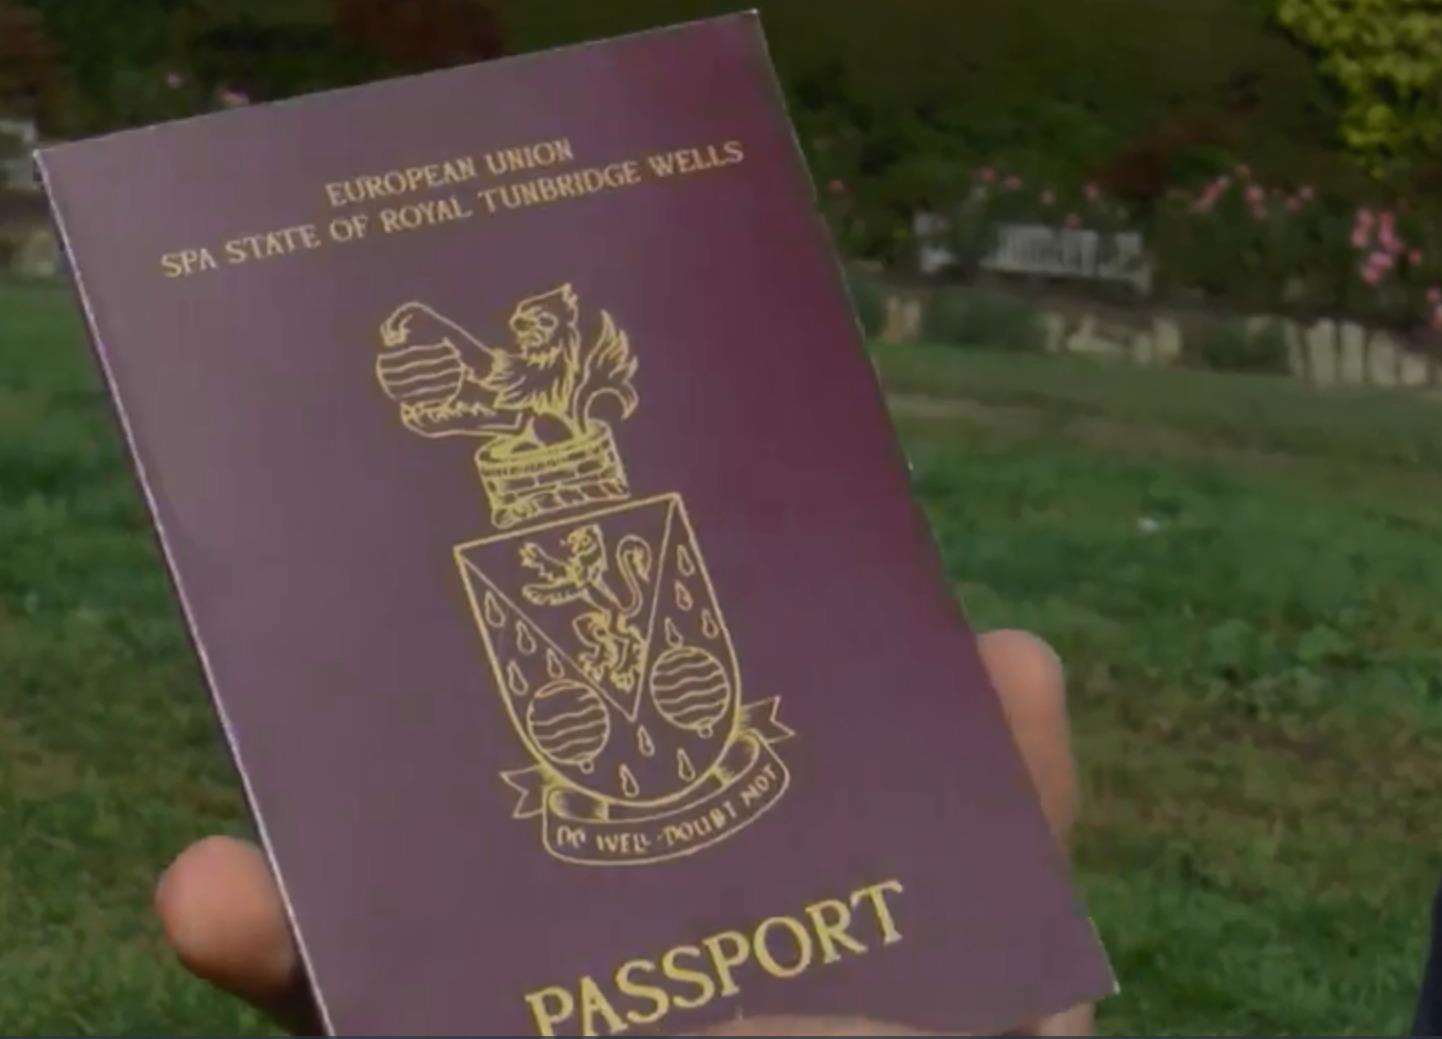 The Tunbridge Wells passport is available for £4